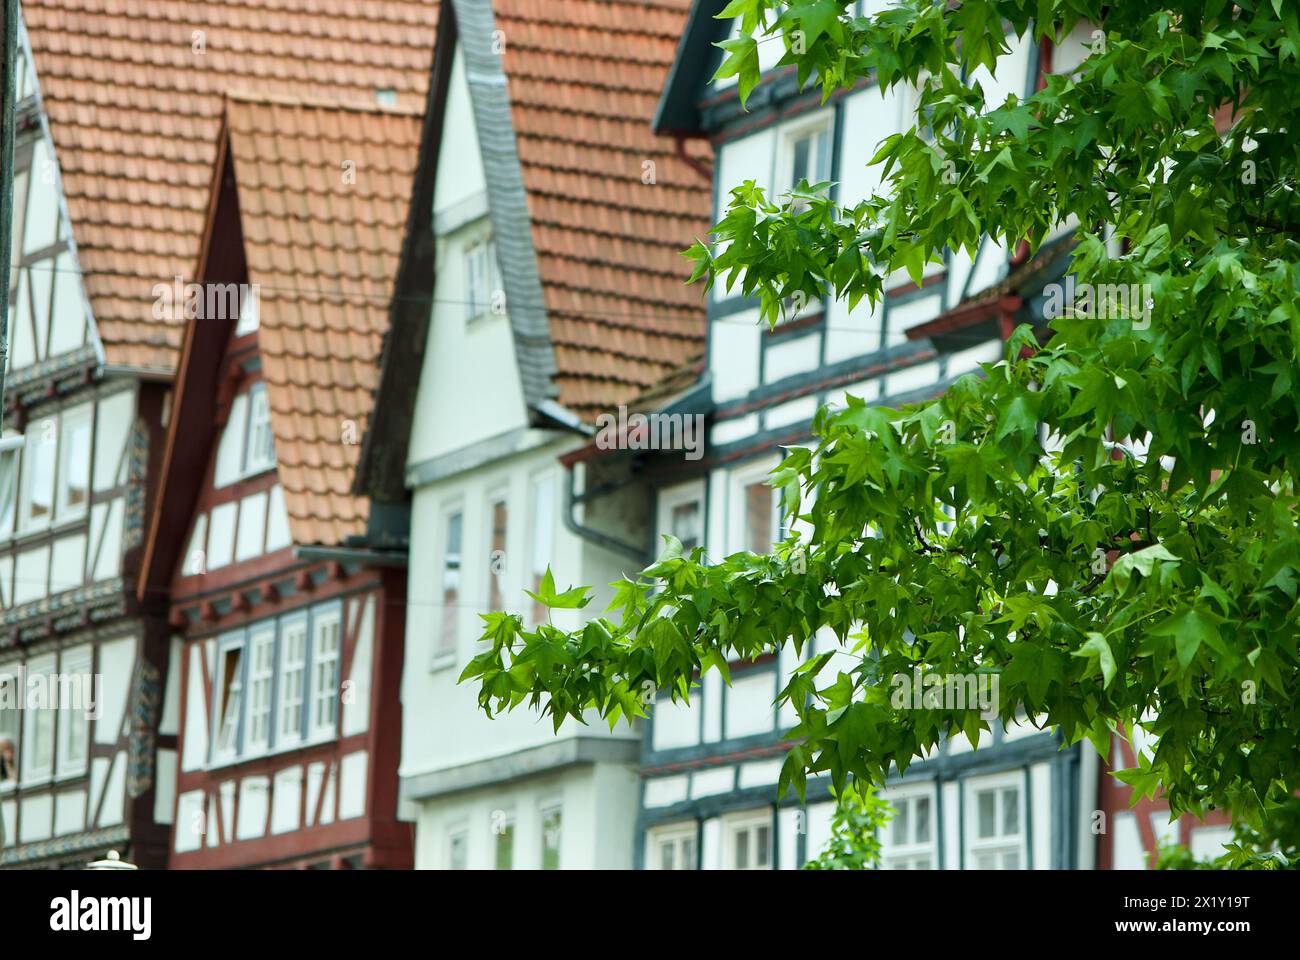 Plane tree with green leaves in front of half-timbered buildings in Germany in summer. Stock Photo